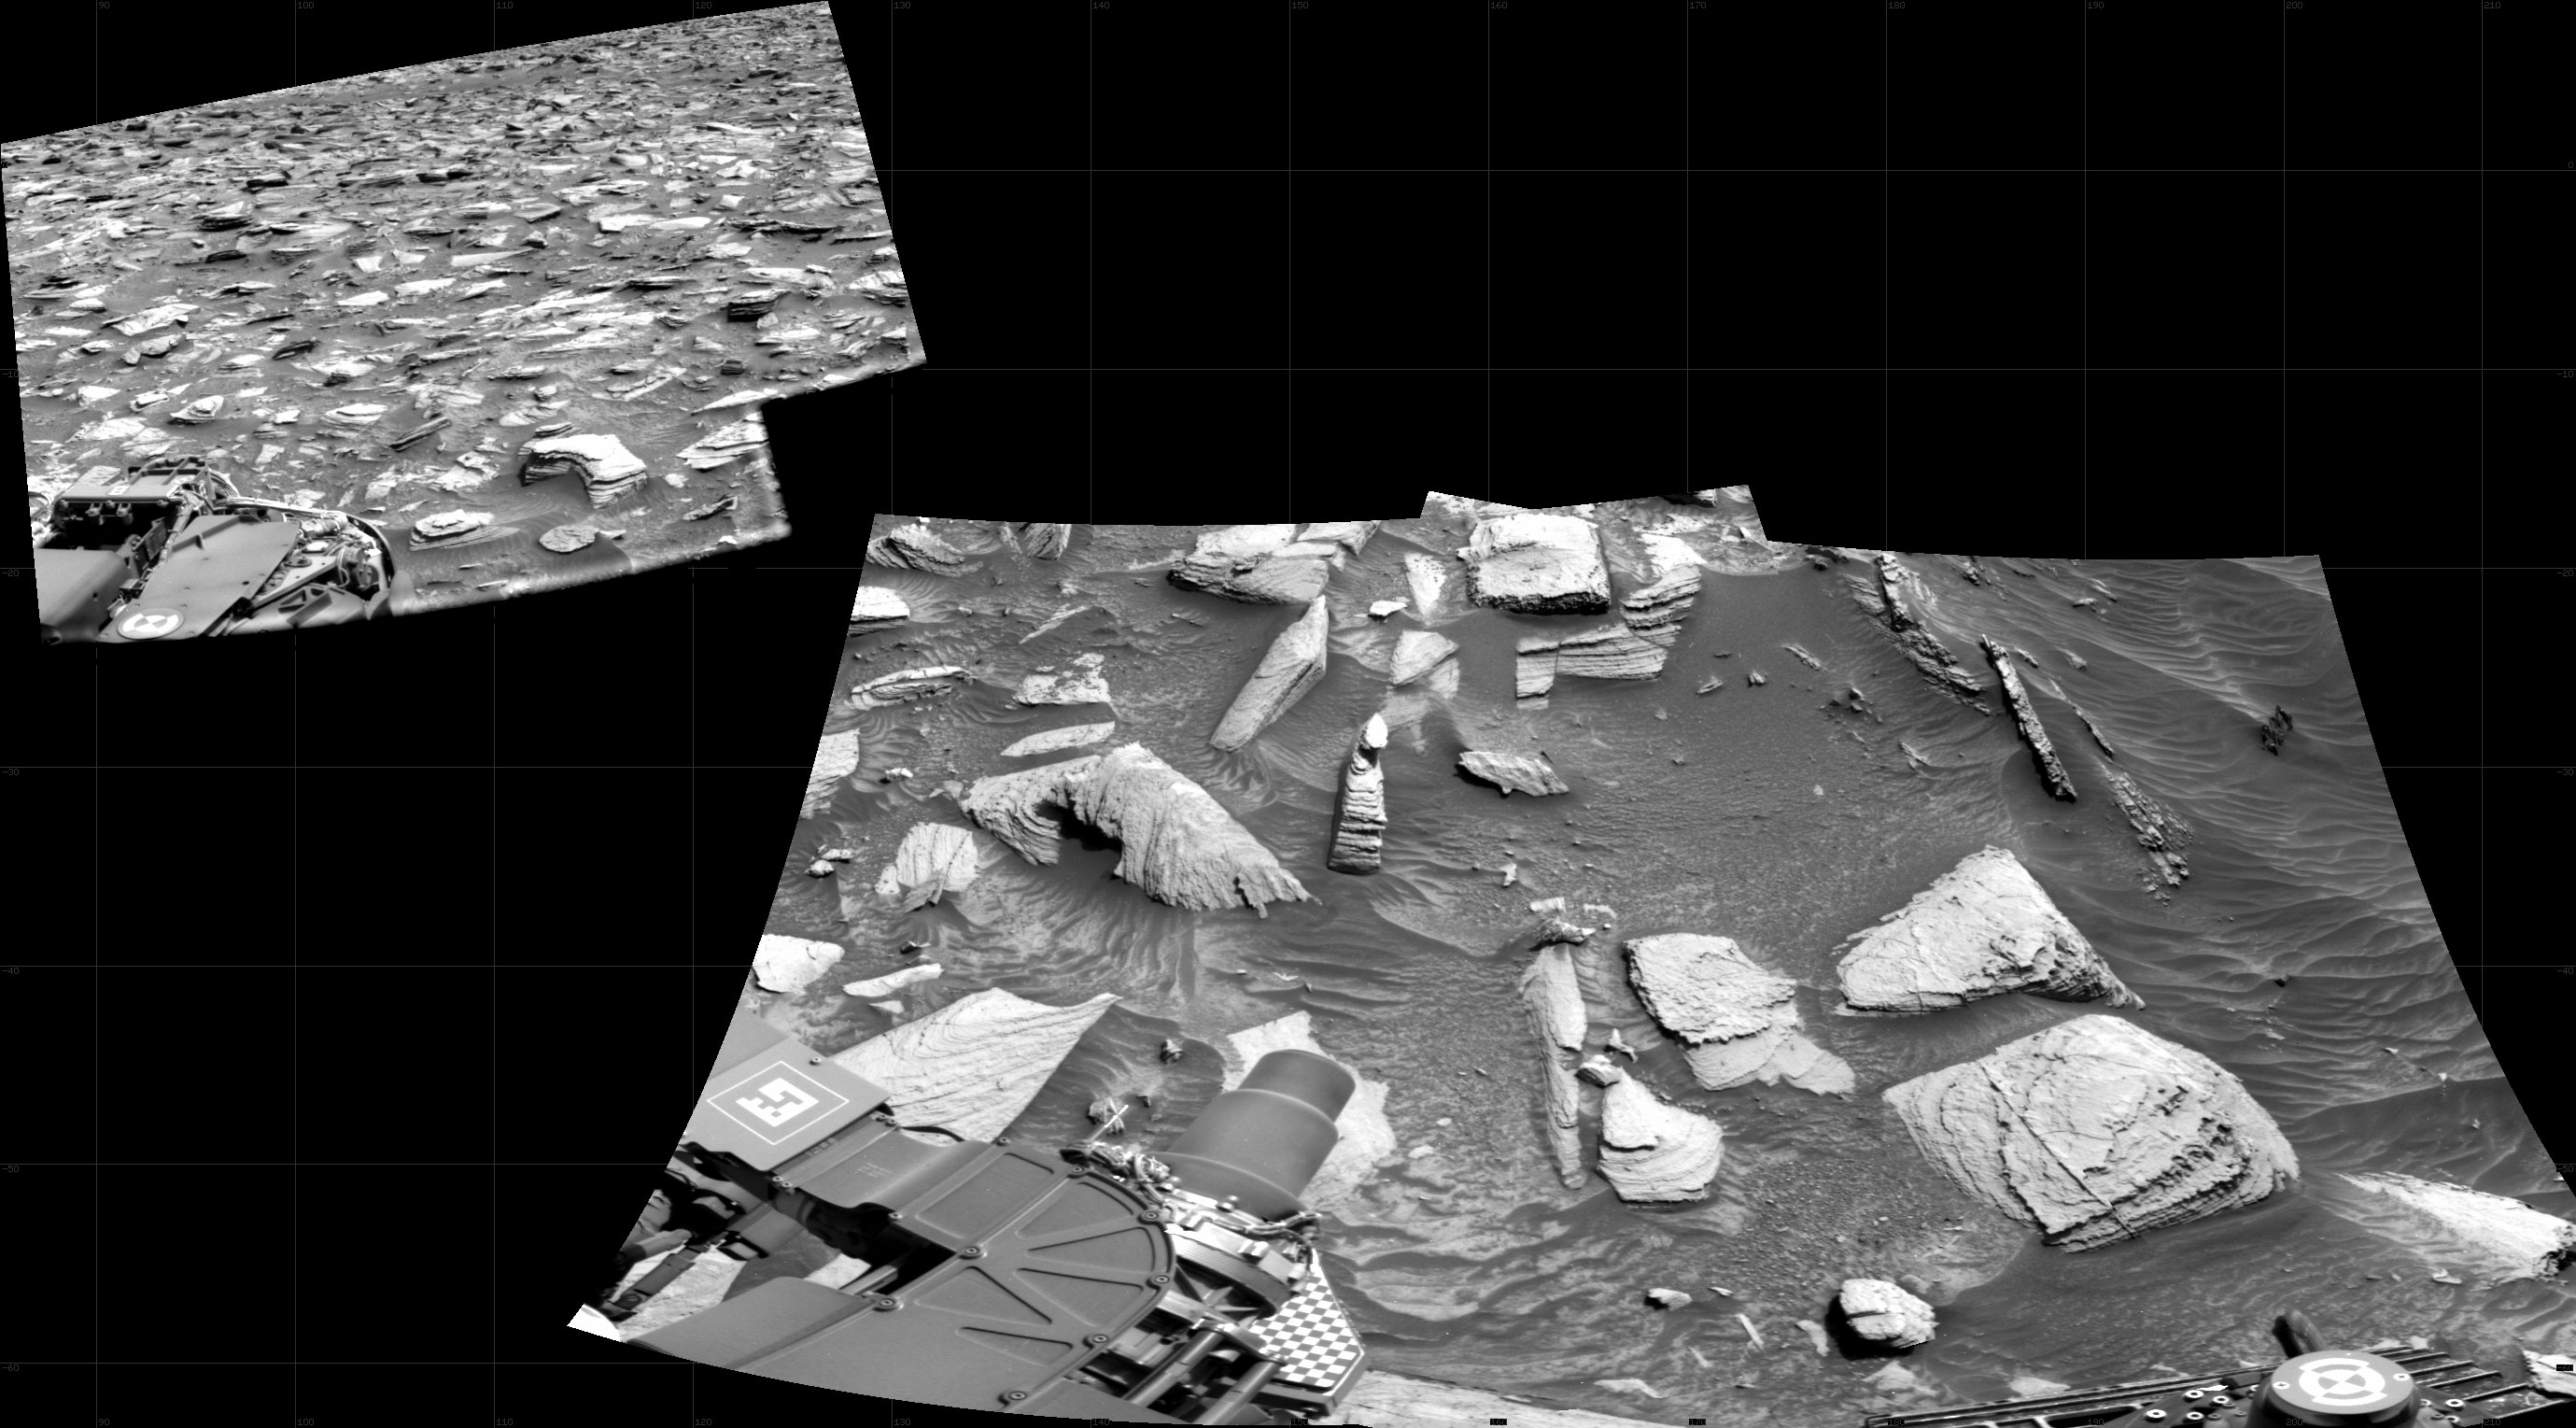 Curiosity took the images on May 06, 2024, Sol 4176 of the Mars Science Laboratory mission at drive 384, site number 107. The local mean solar time for the image exposures was 1 PM.